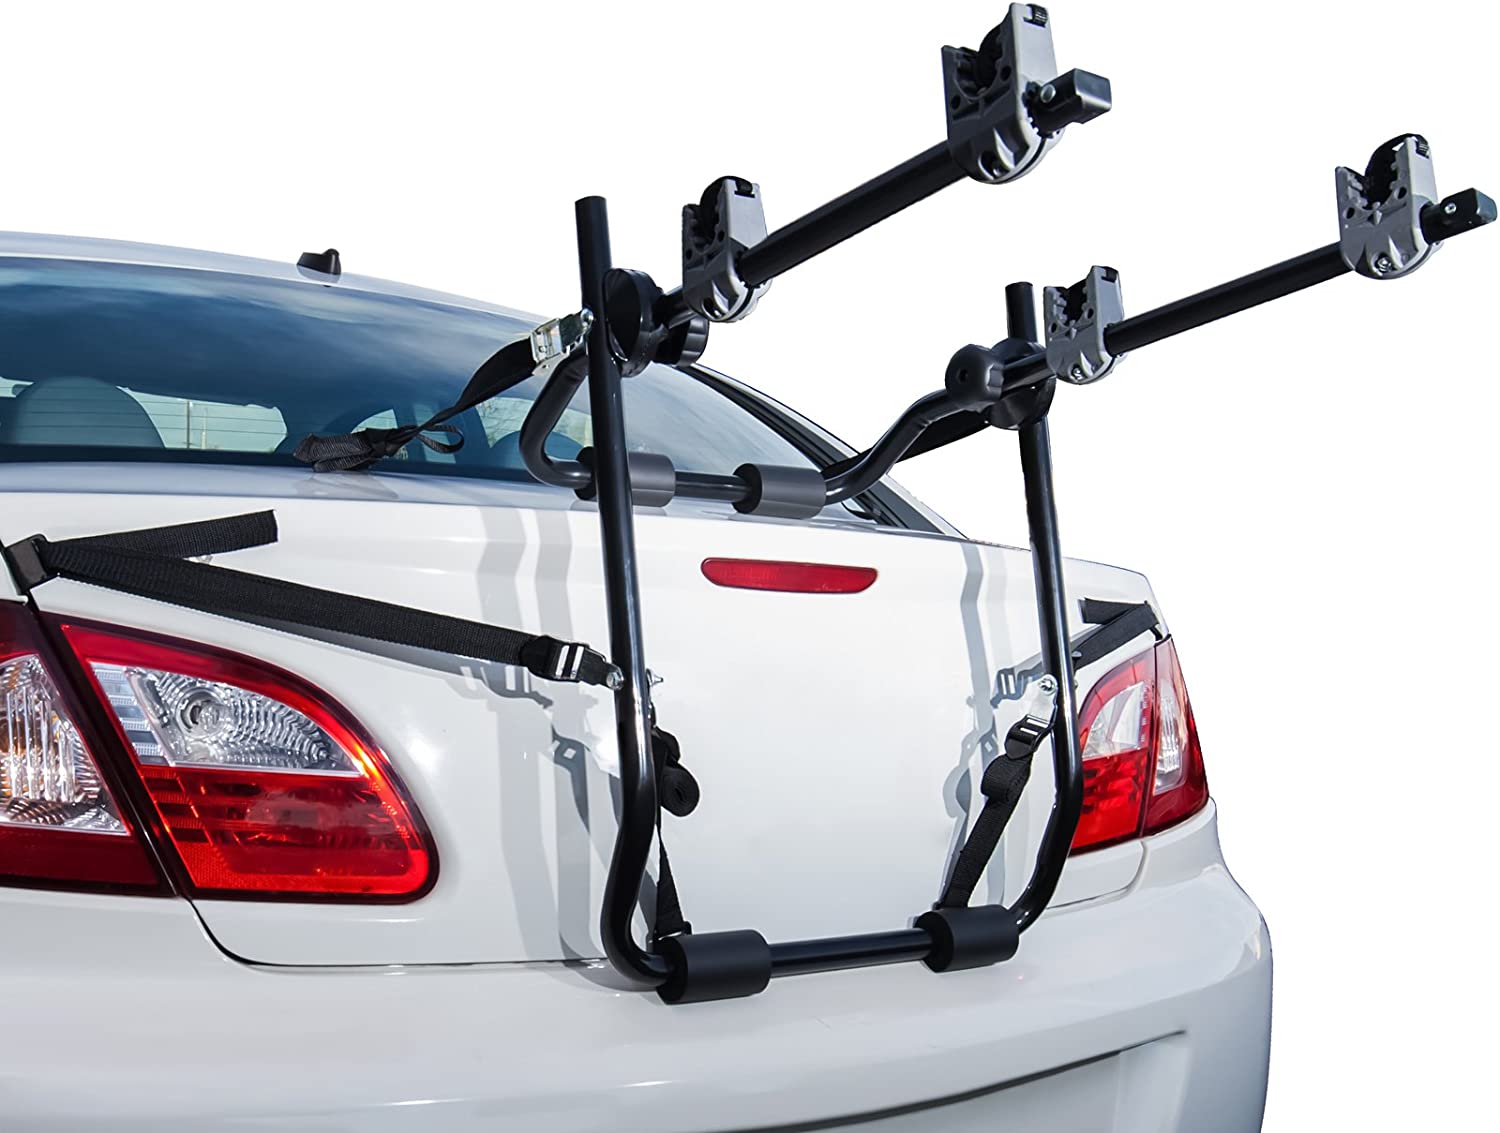 OxGord Bicycle Rack Trunk-Mounted 2-Bike Carrier For Cars Universal Fit ...